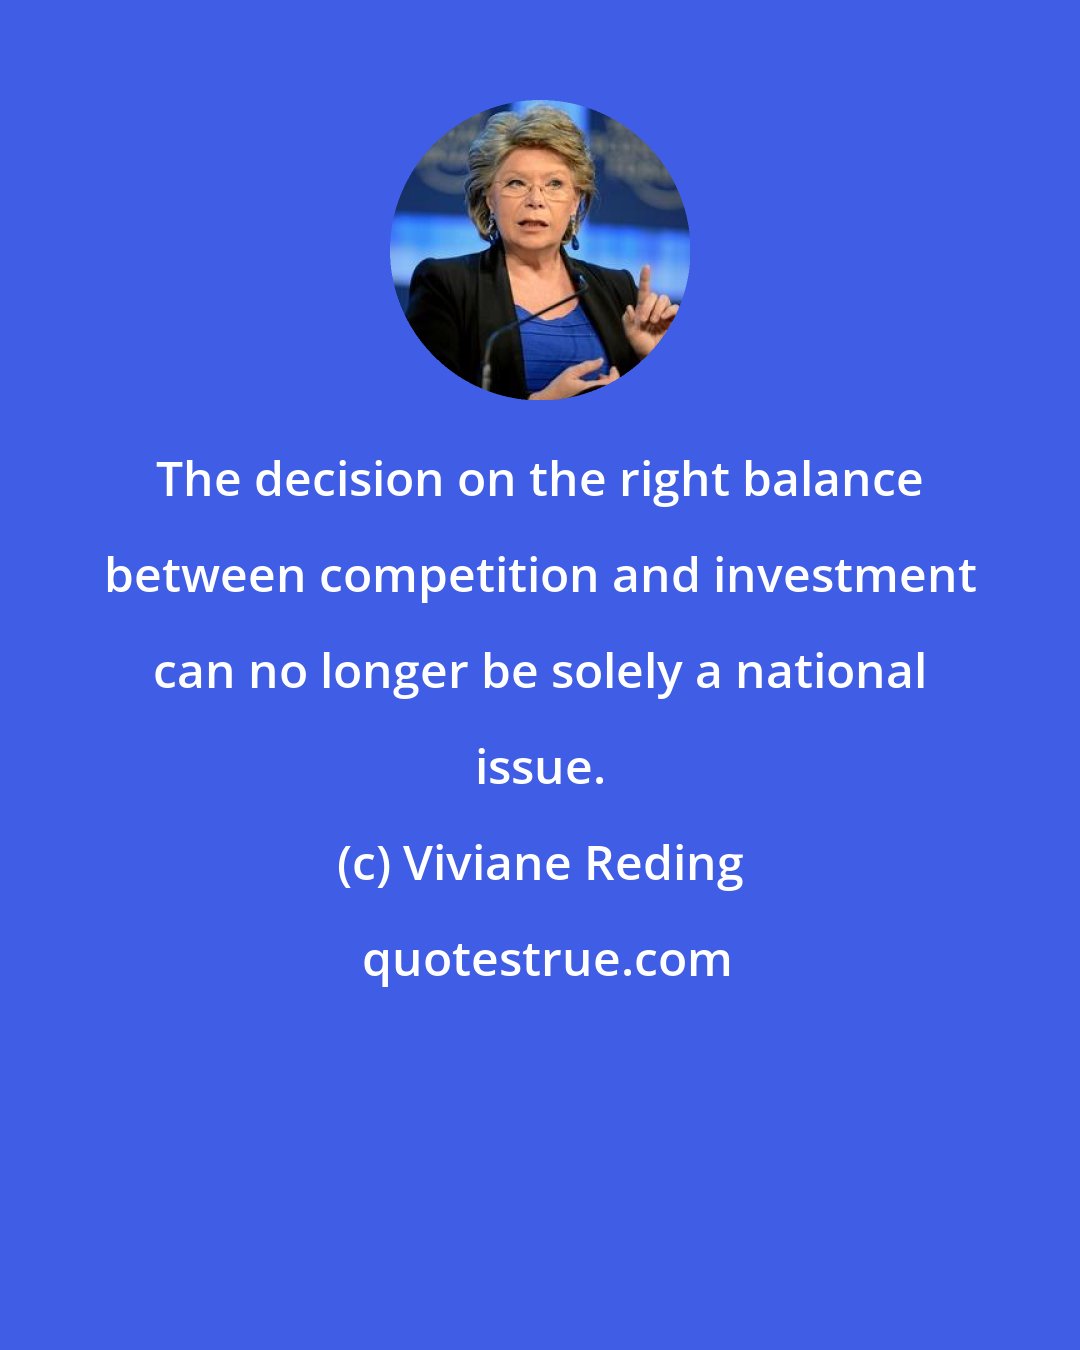 Viviane Reding: The decision on the right balance between competition and investment can no longer be solely a national issue.